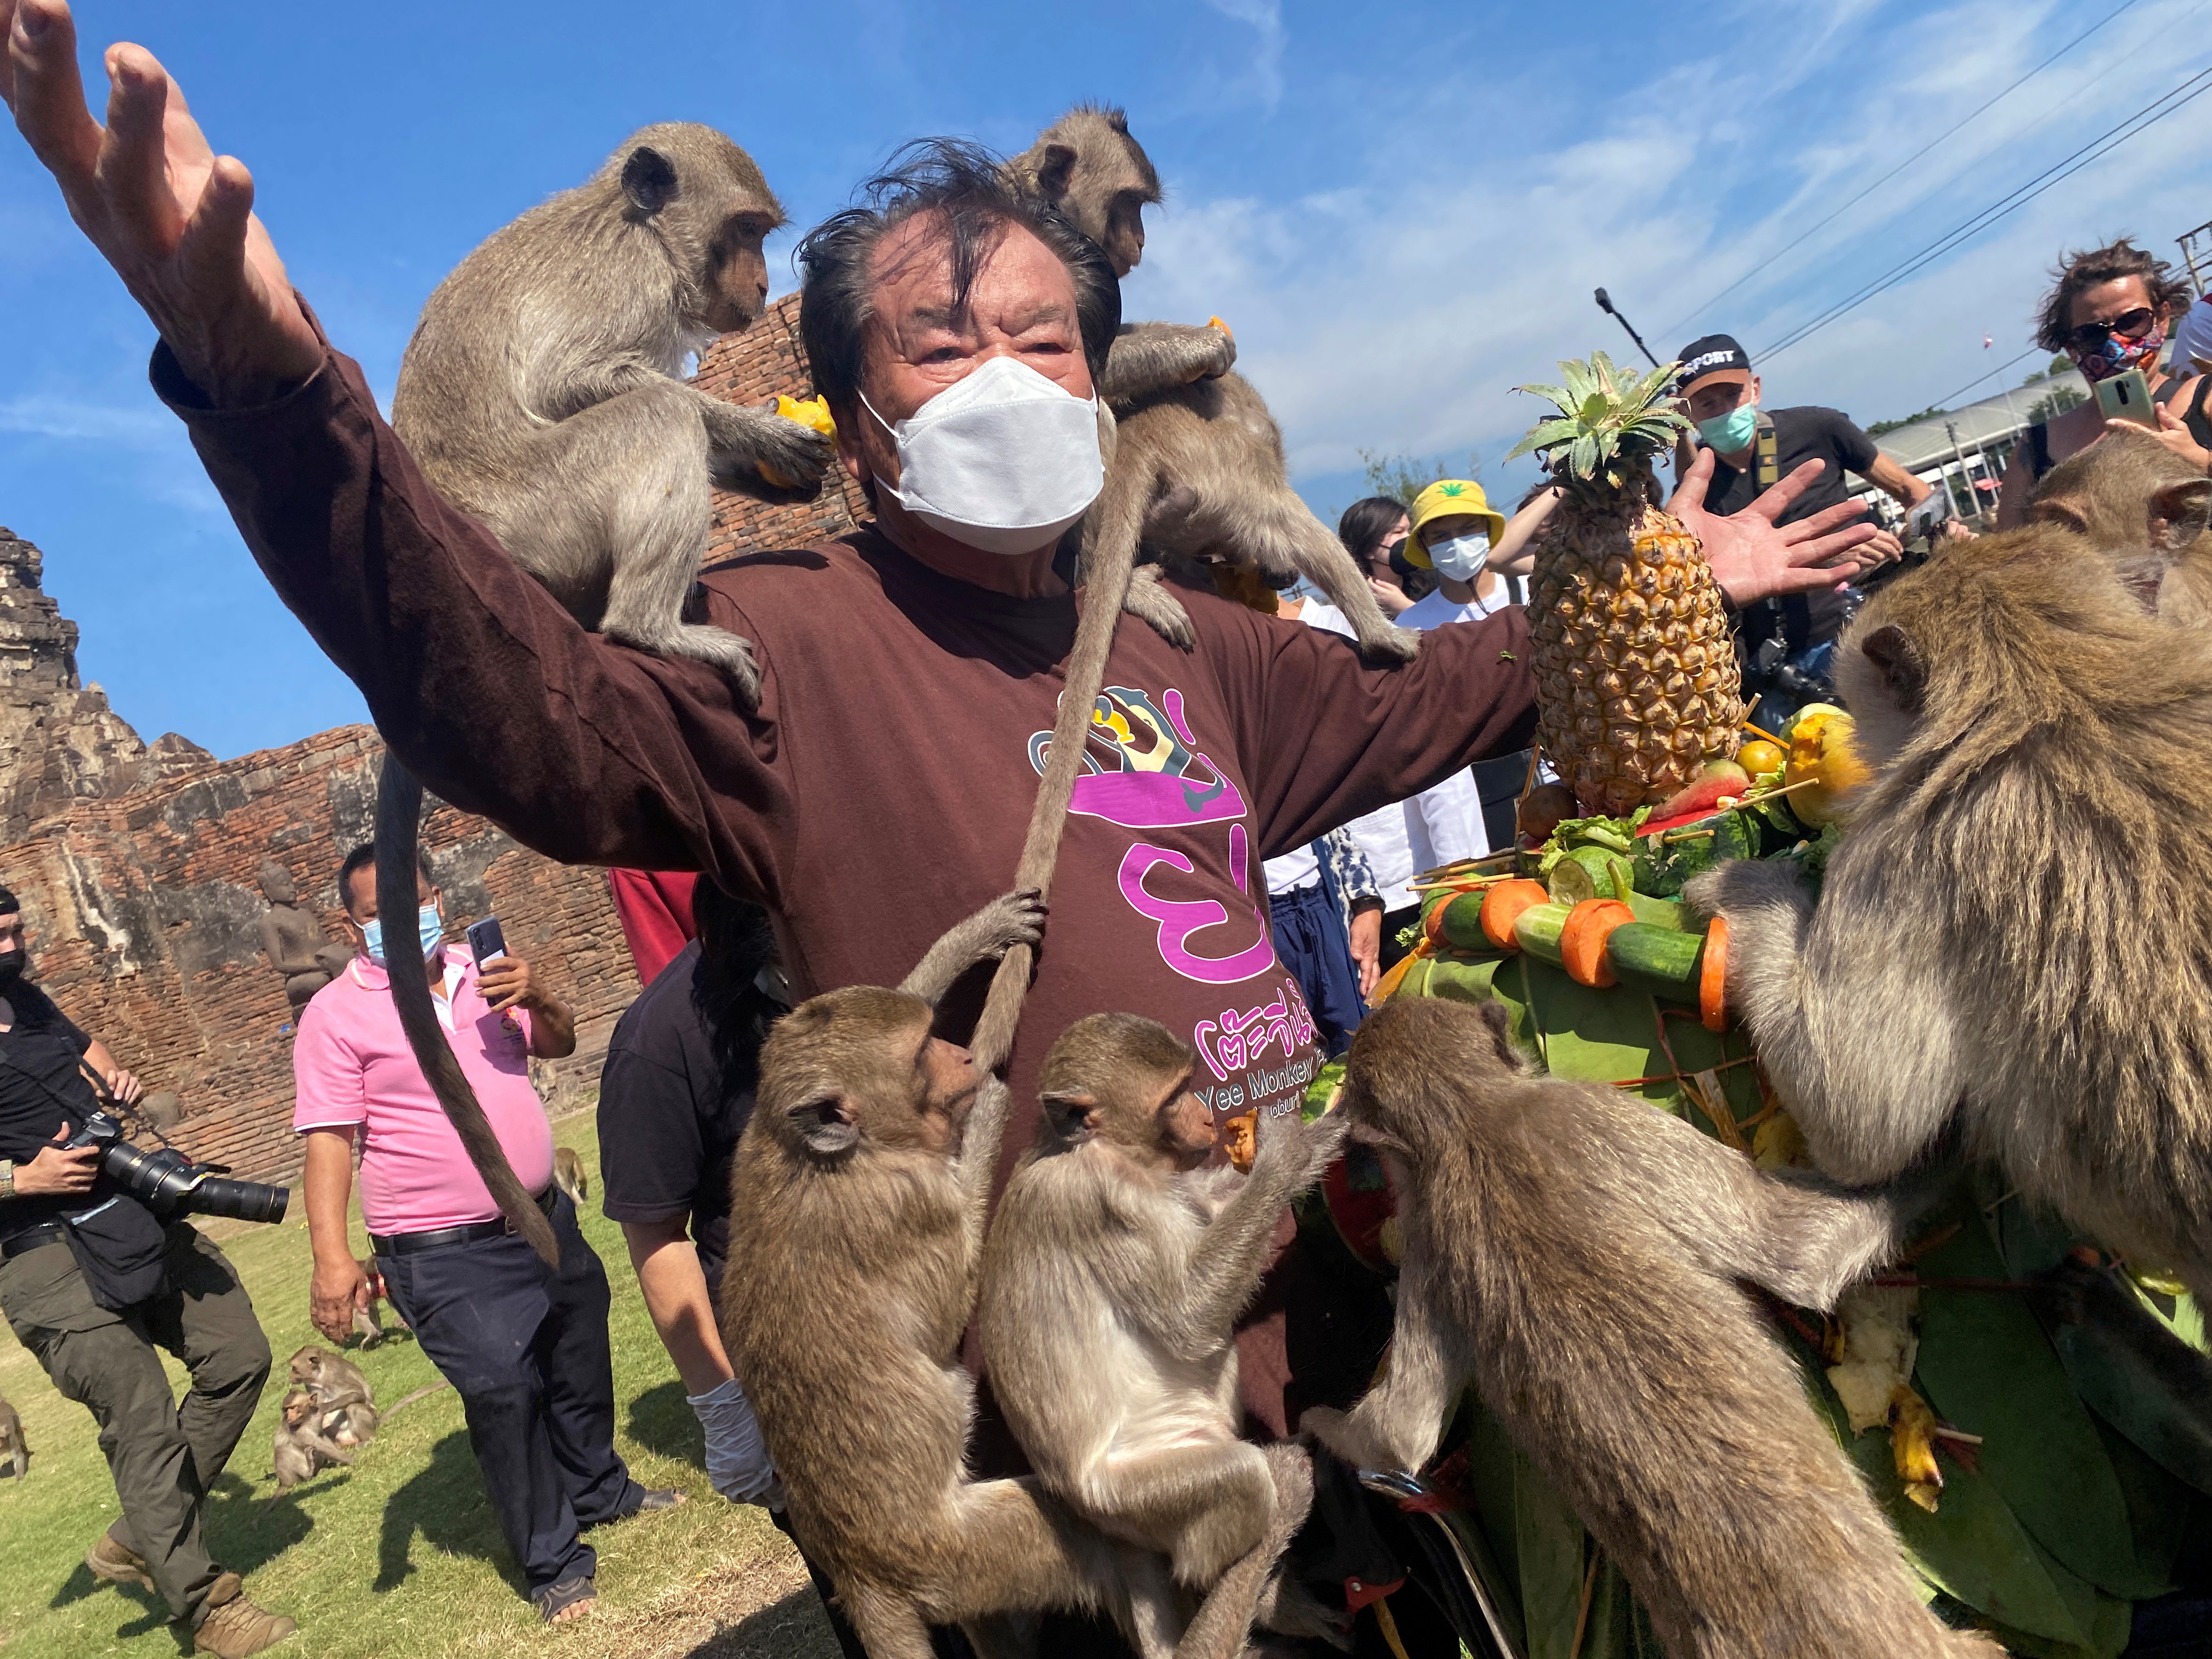 Monkeys cling onto an organiser while eating fruit during  the annual Monkey Festival, which resumed after a two-year hiatus due to the COVID-19 pandemic, in Lopburi province, Thailand, November 28, 2021. REUTERS/Jiraporn Kuhakan